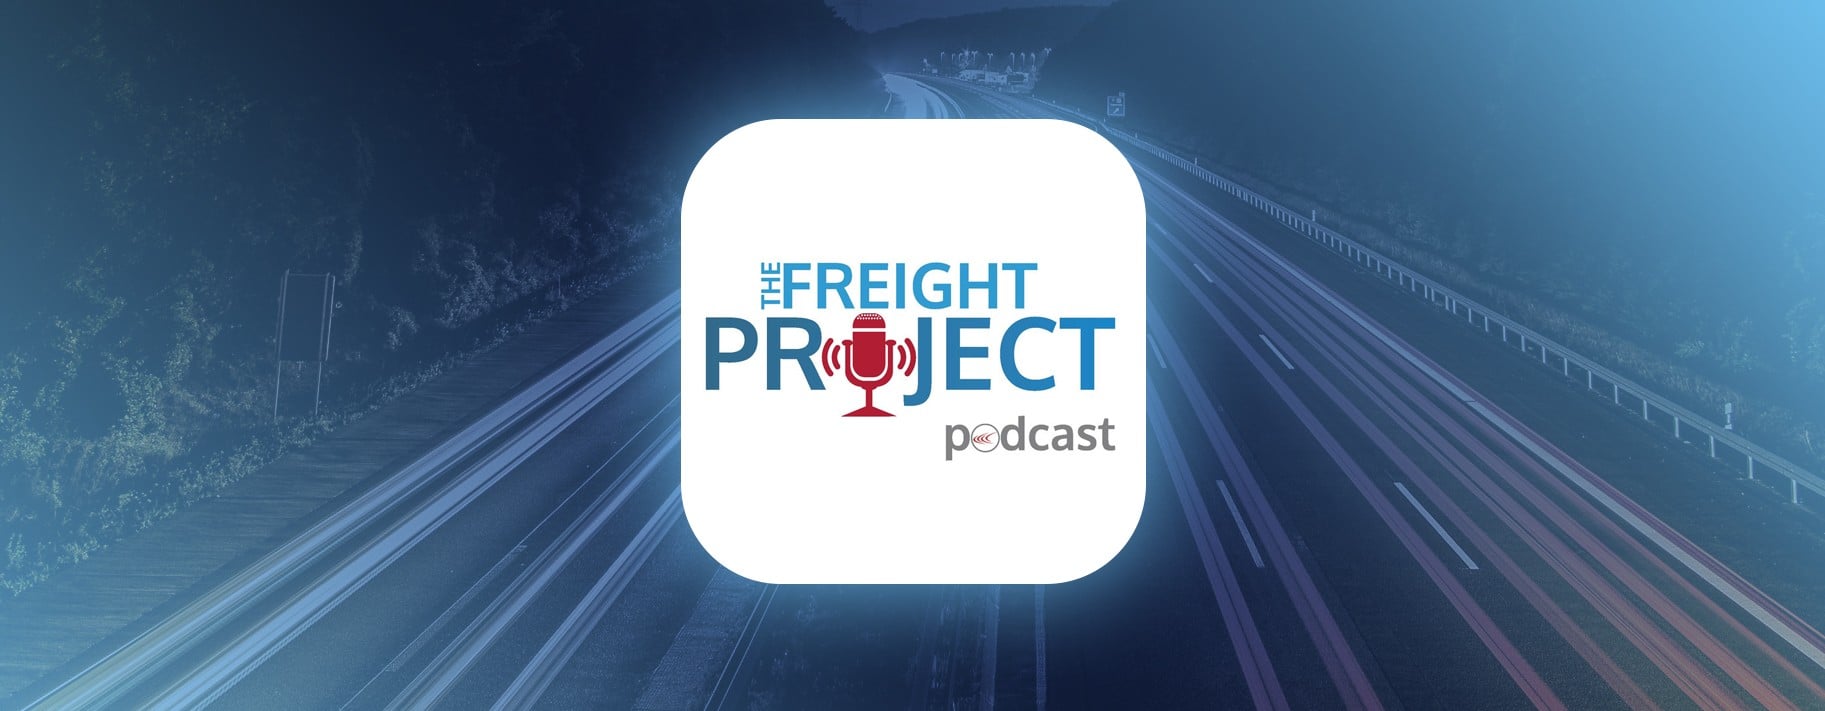 retail Logistics freight project podcast